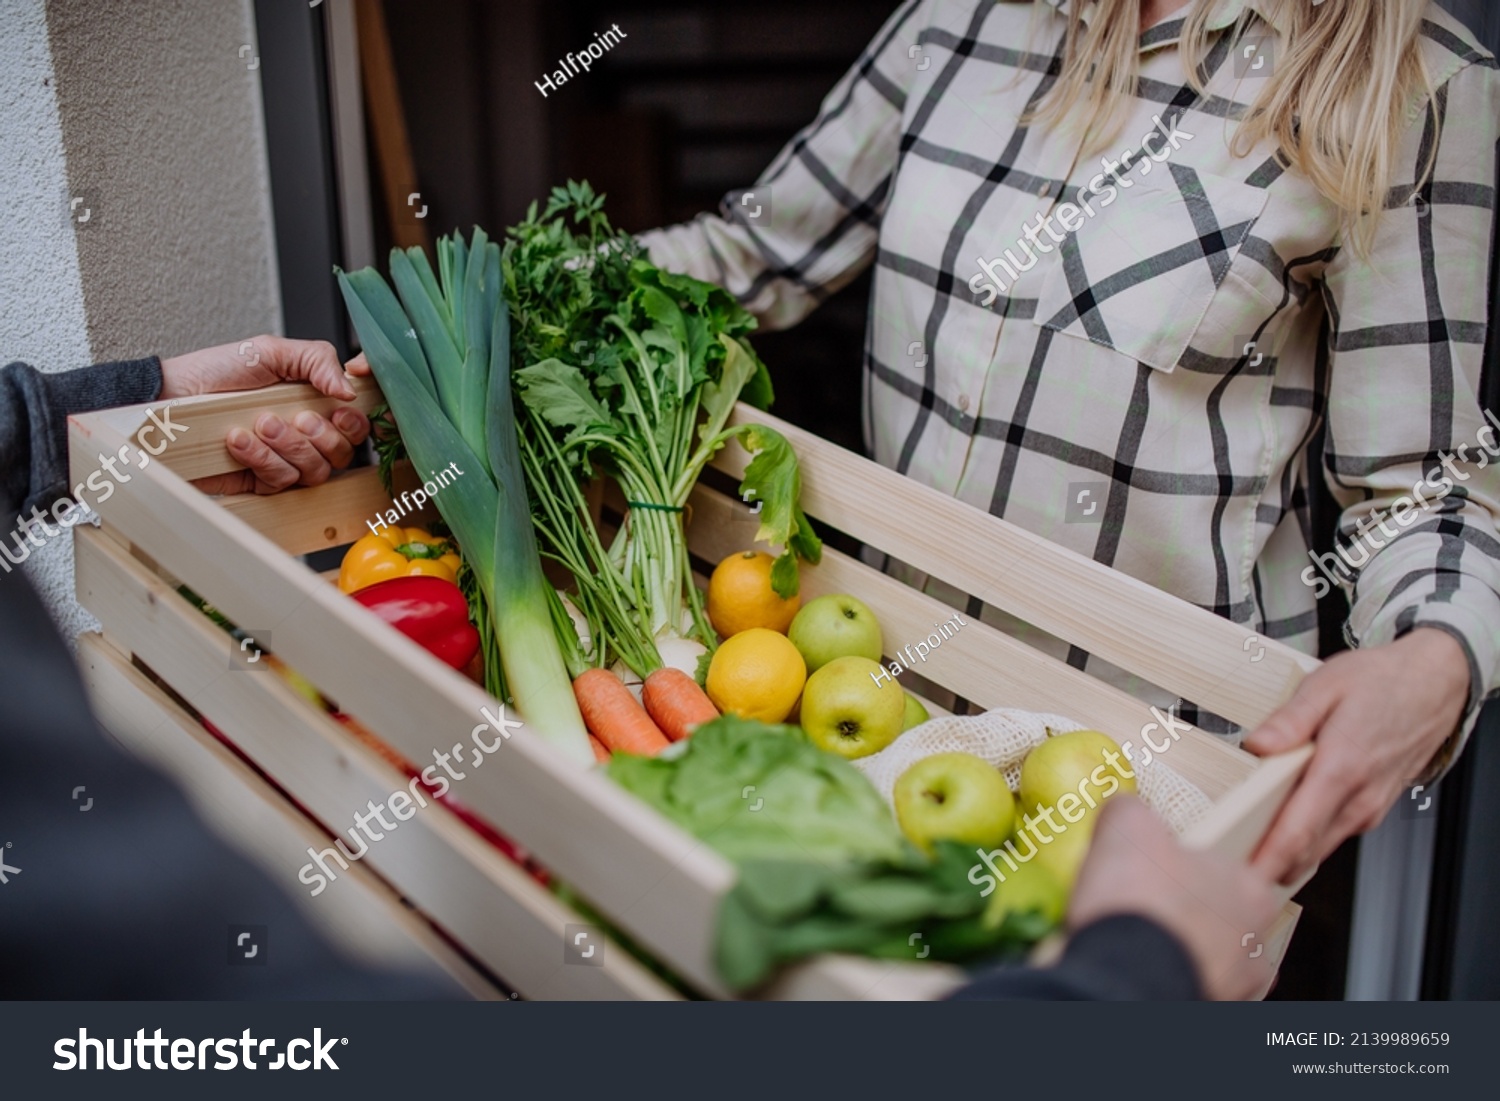 Man holding crate with vegetales and fruit and delivering it to woman standing at doorway. #2139989659